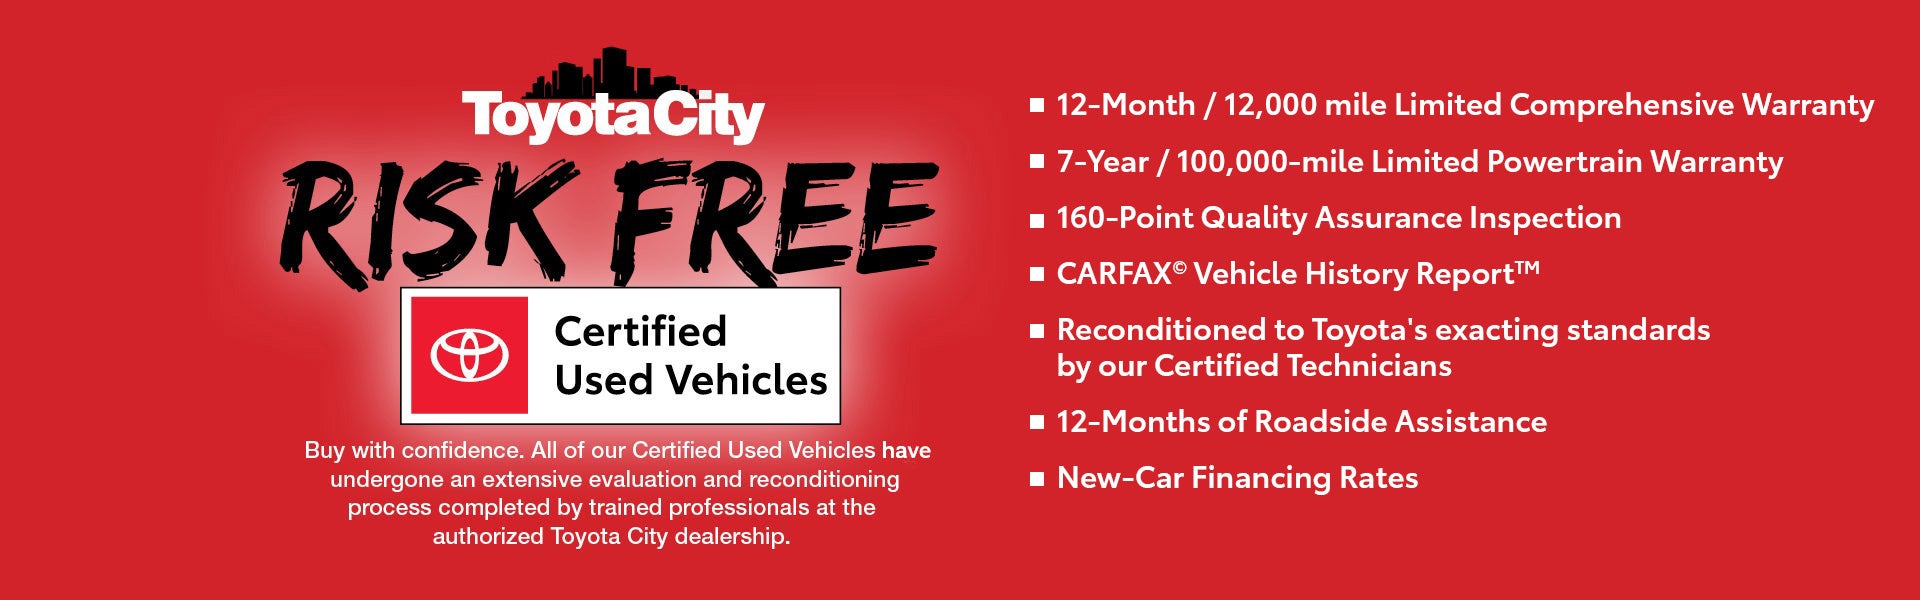 RISK FREE Toyota Certified Used Vehicles